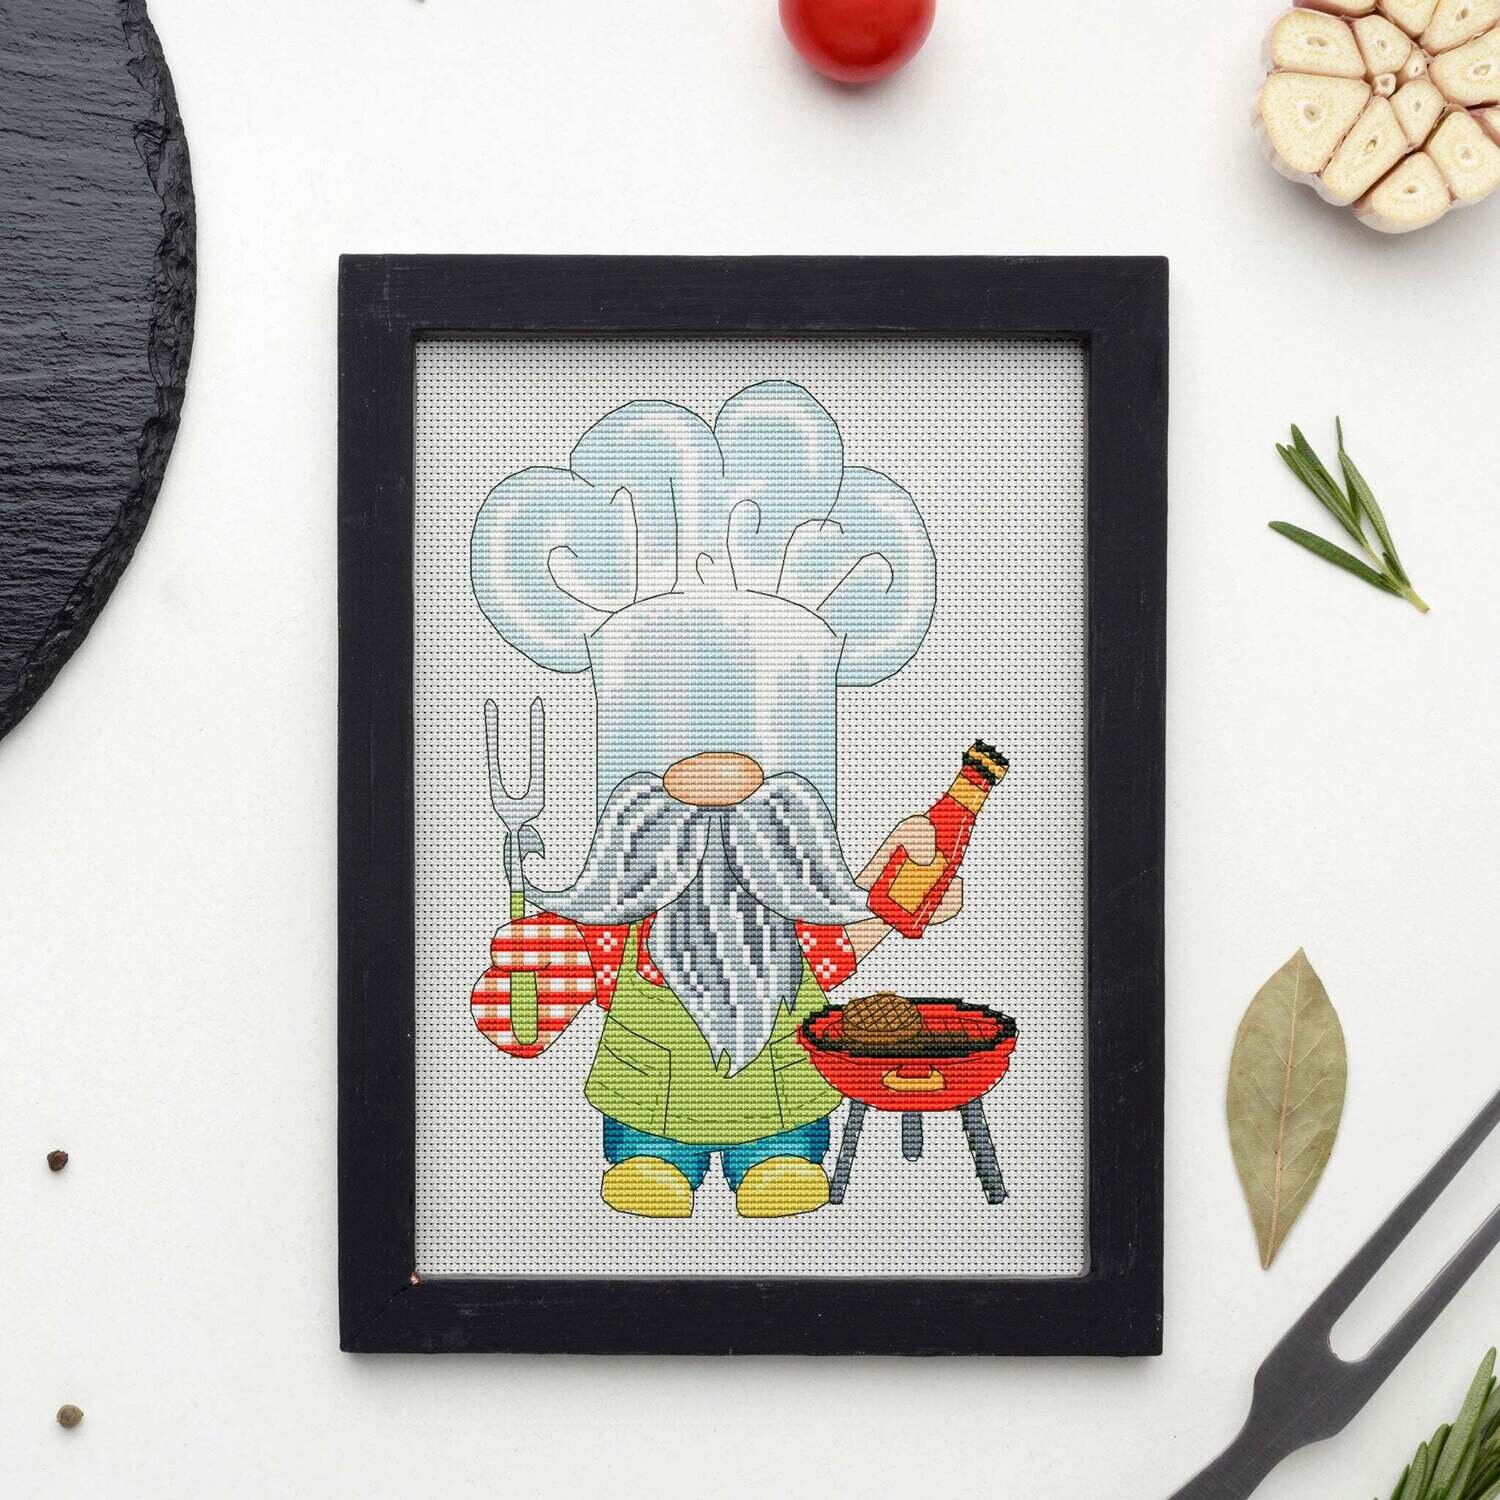 Gnome on the barbecue, Cross stitch pattern, Gnome cross stitch, Weekend cross stitch